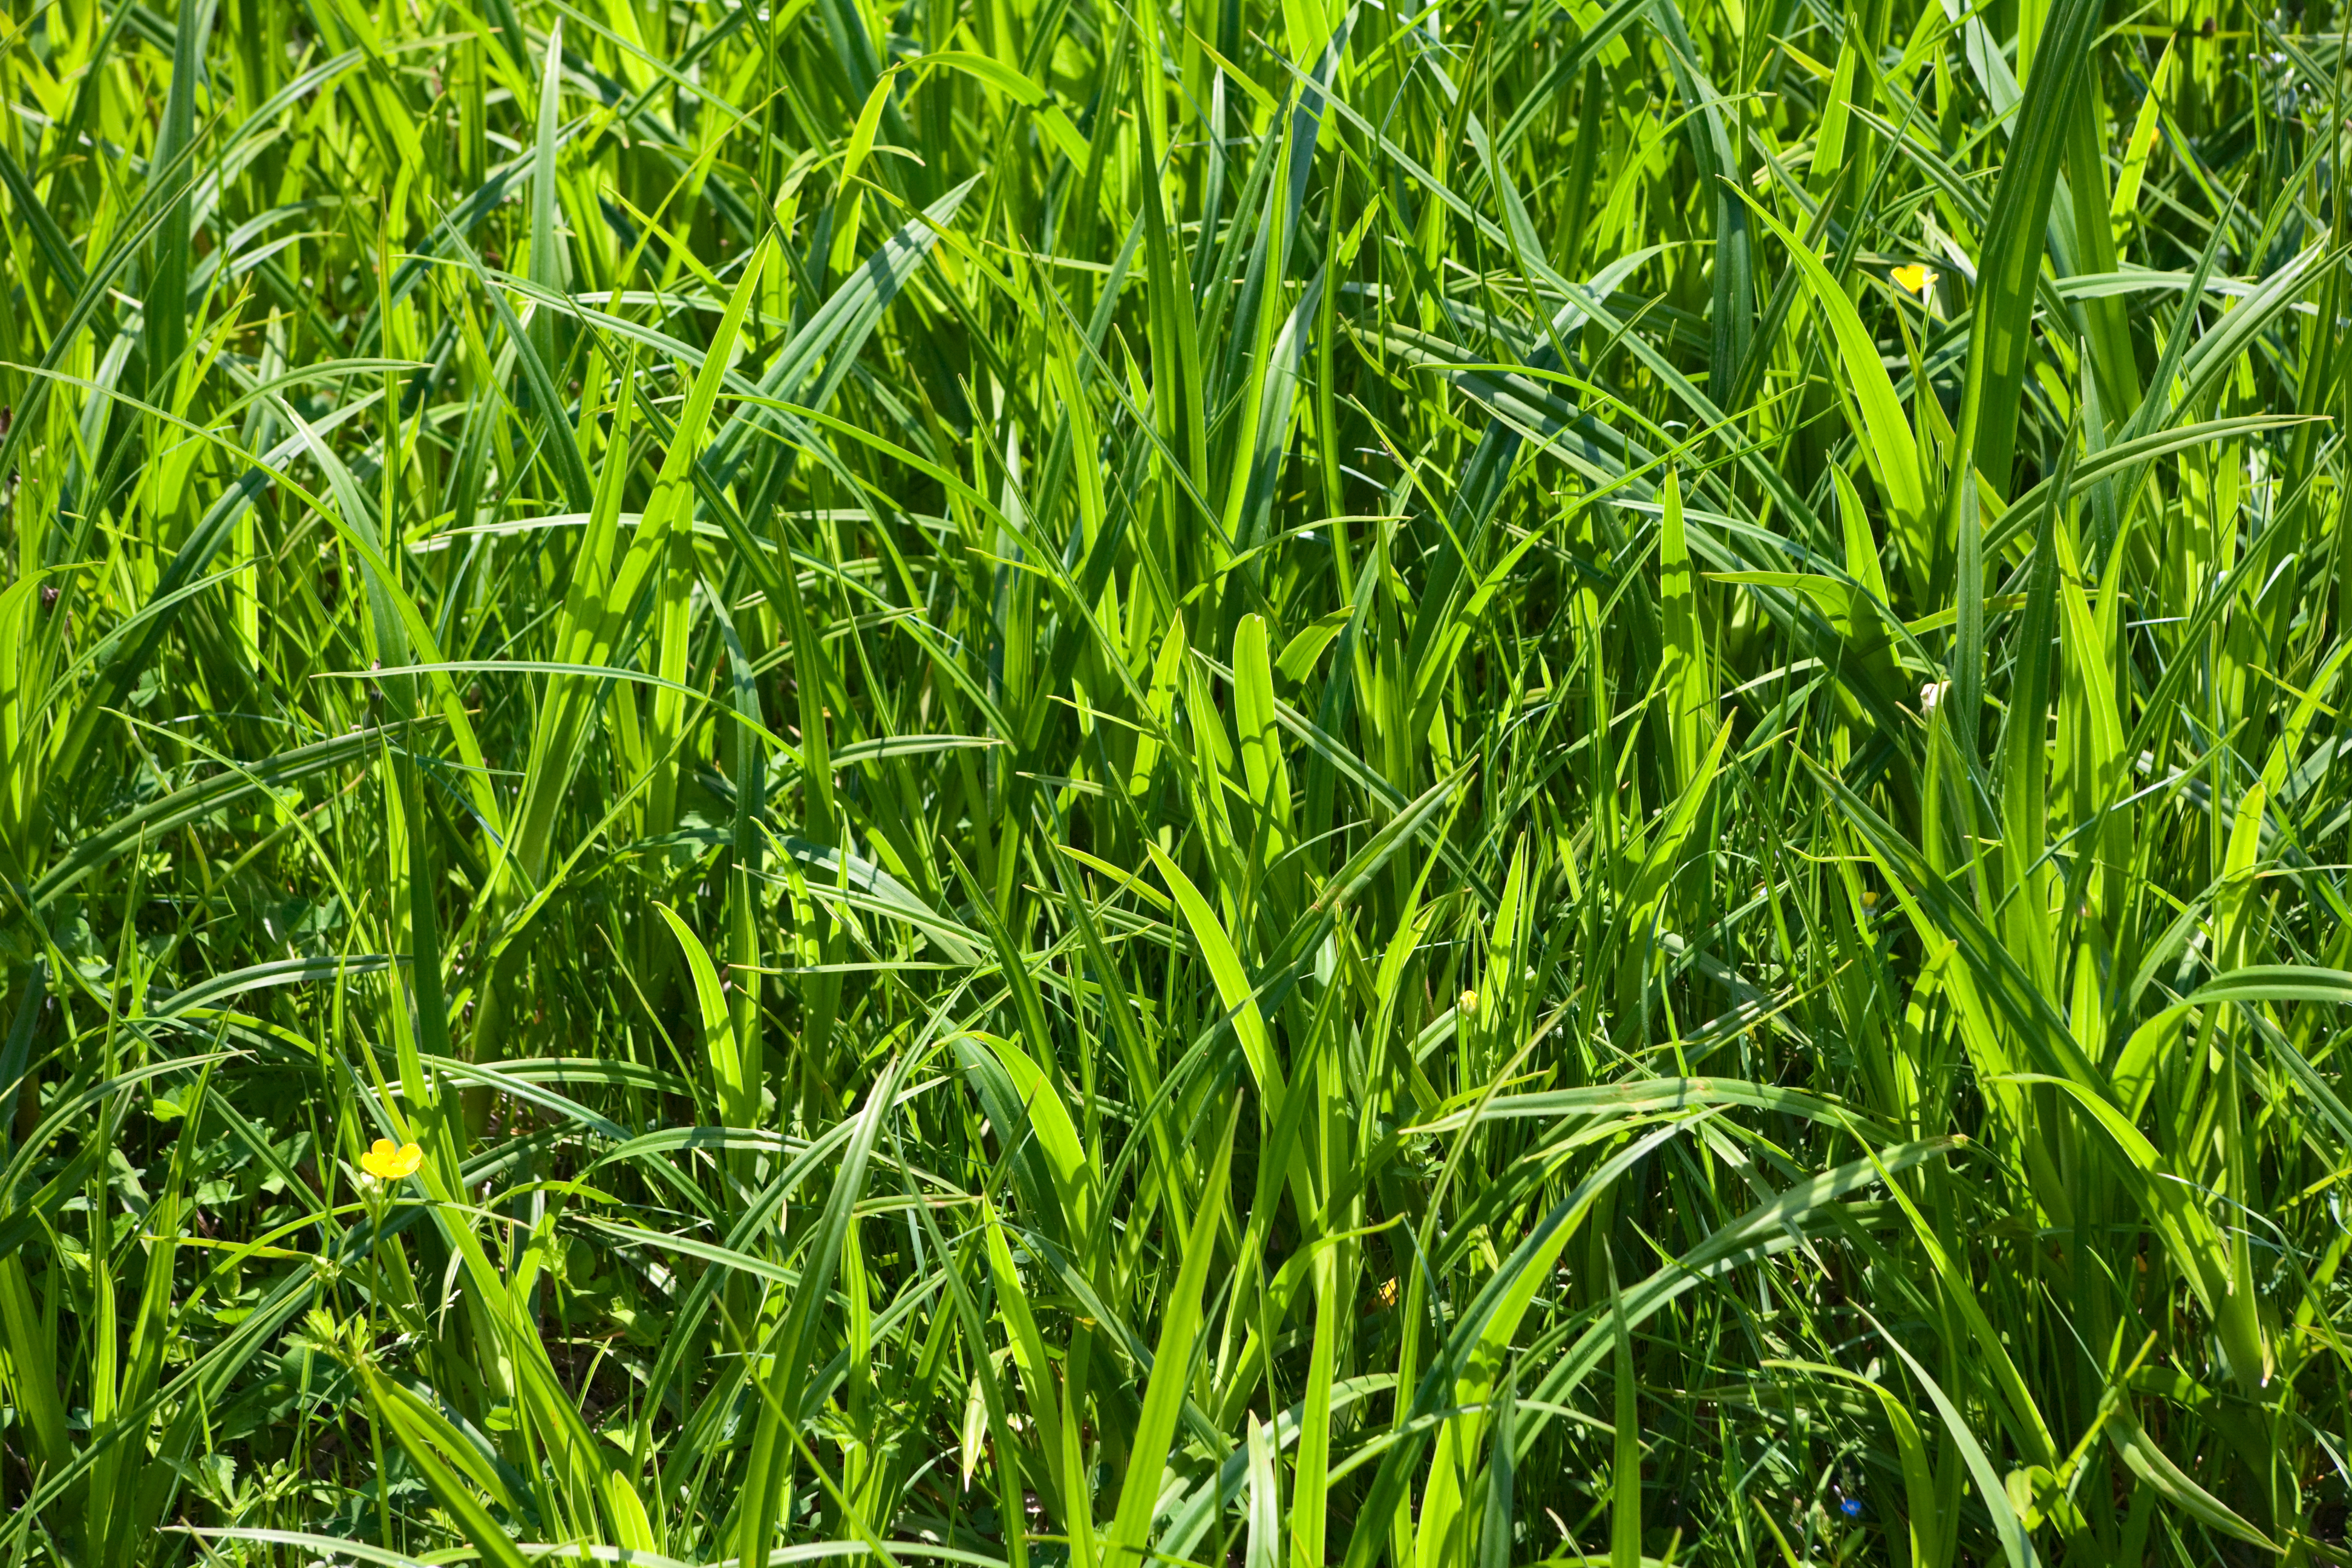 Tall green grass in an open field | photo page - everystockphoto